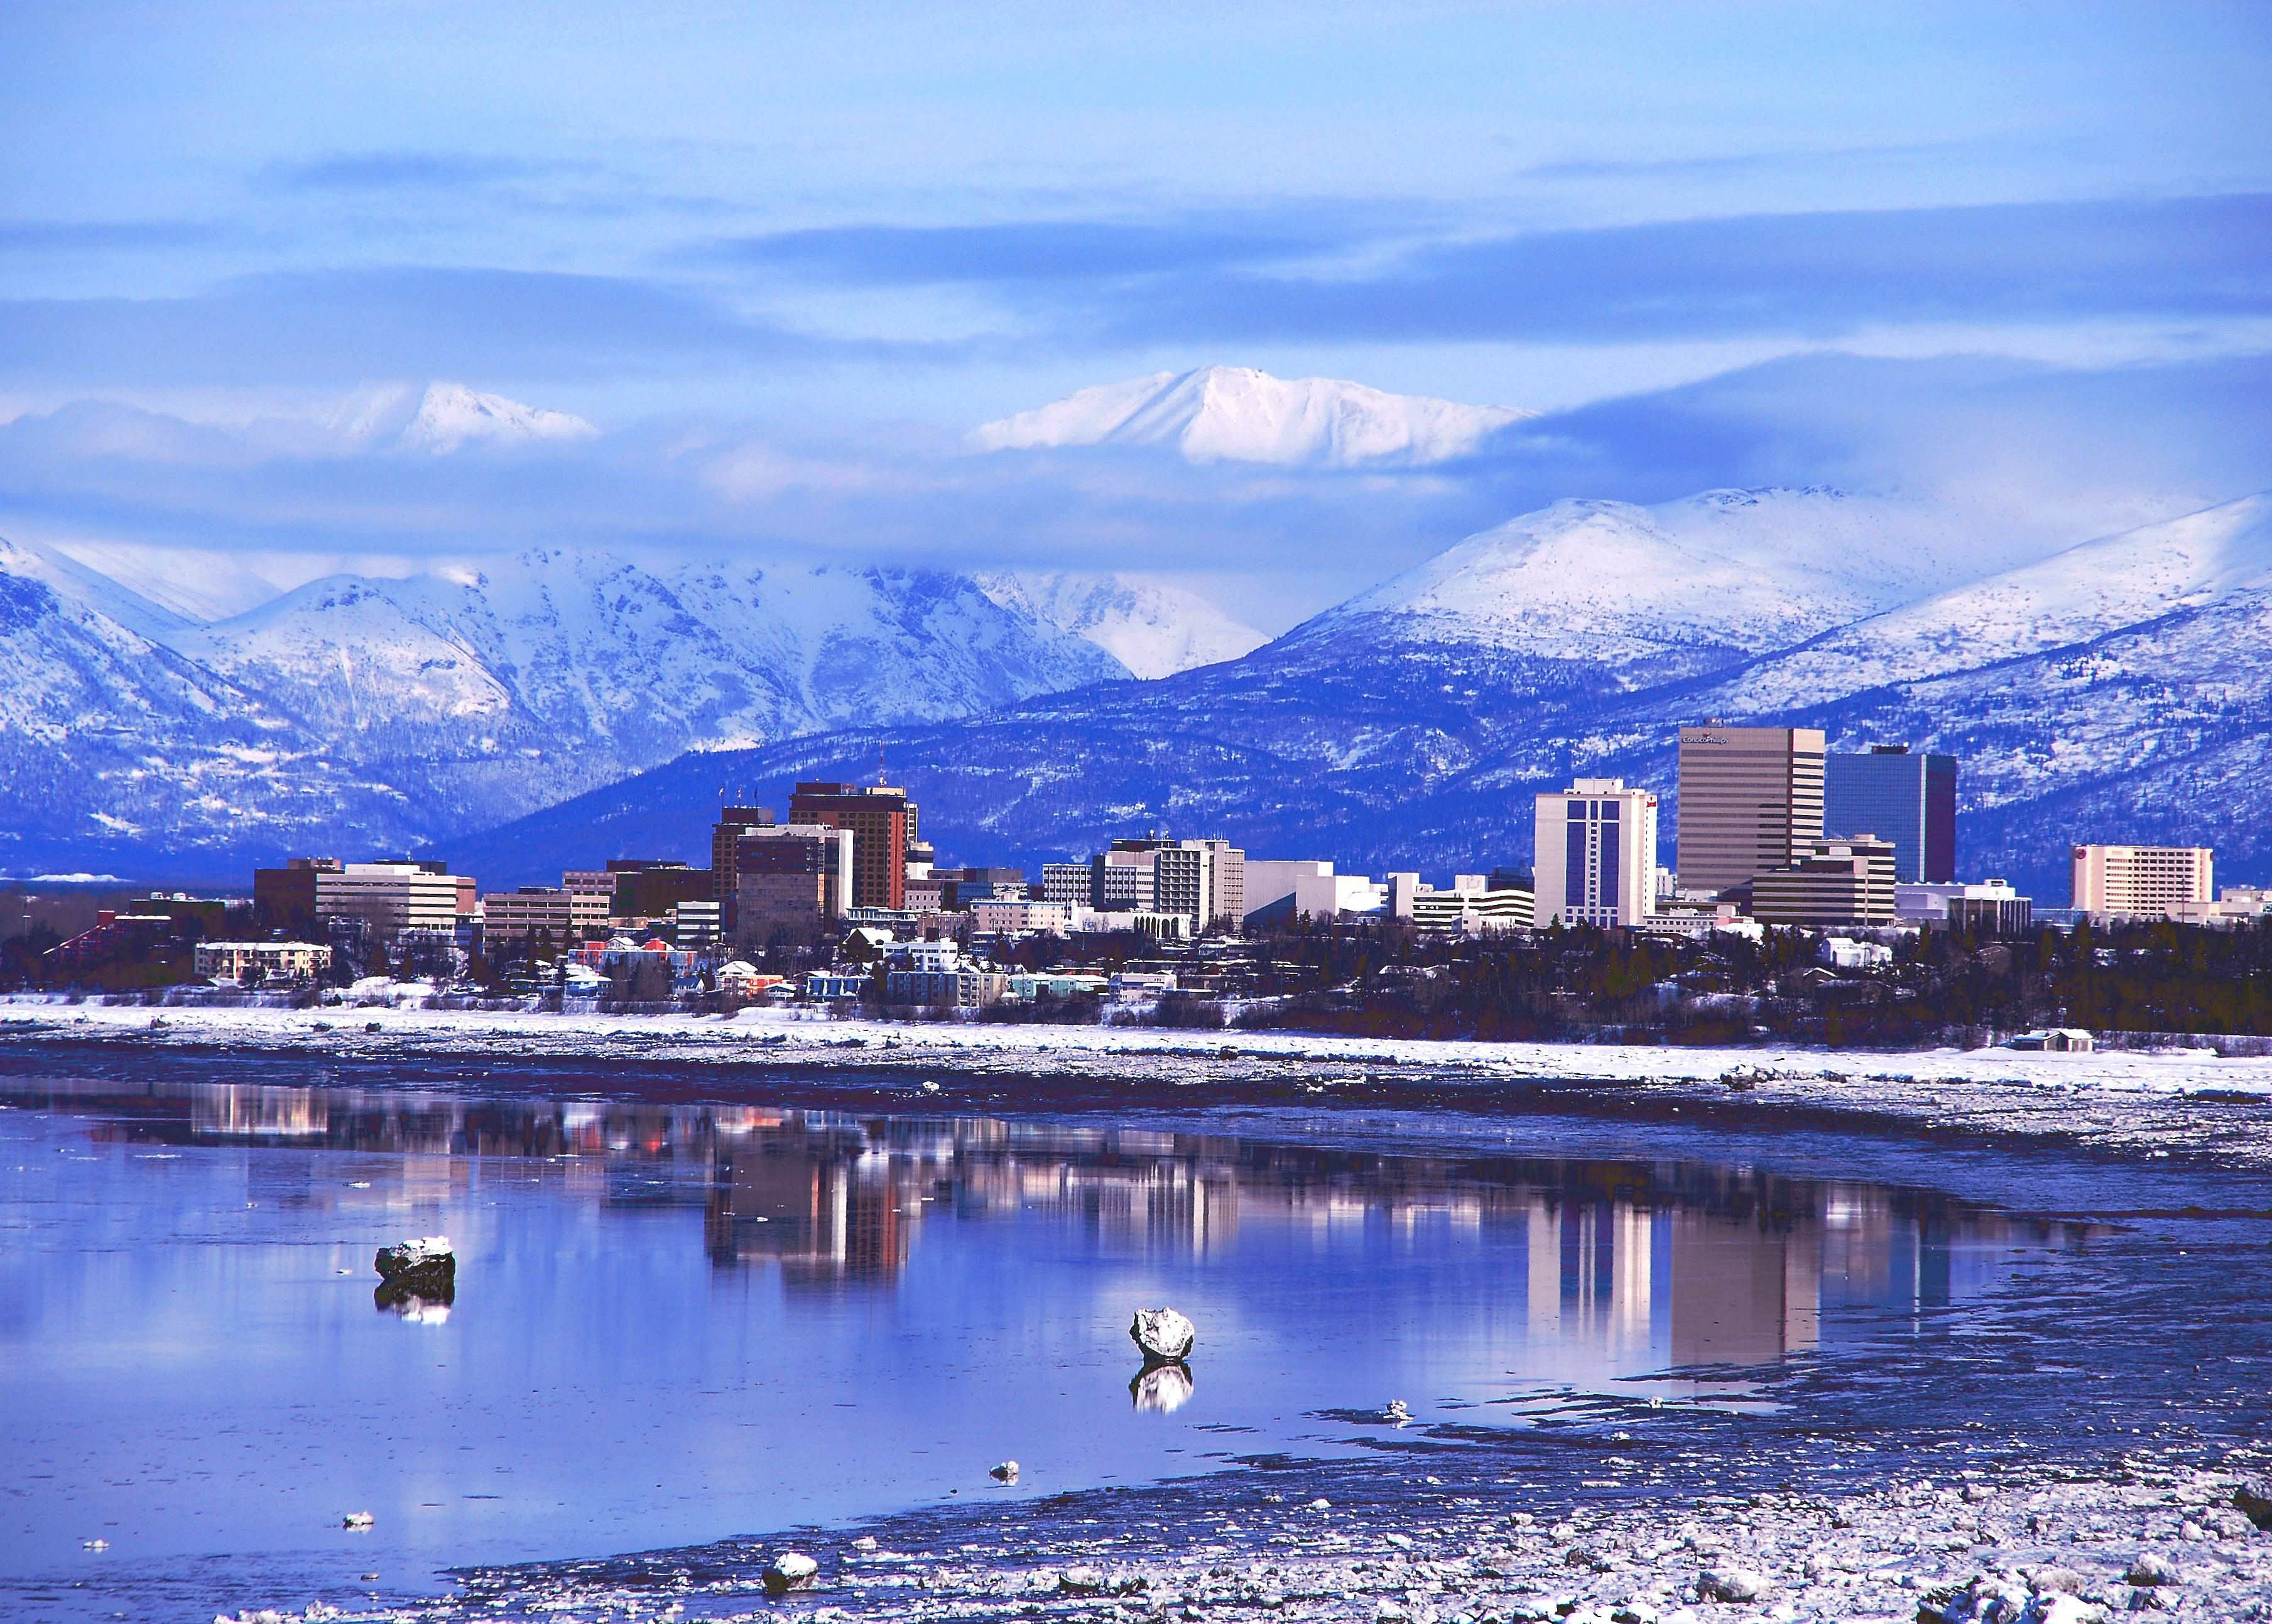 A view of the Anchorage skyline from across the water, with mountains rising behind.